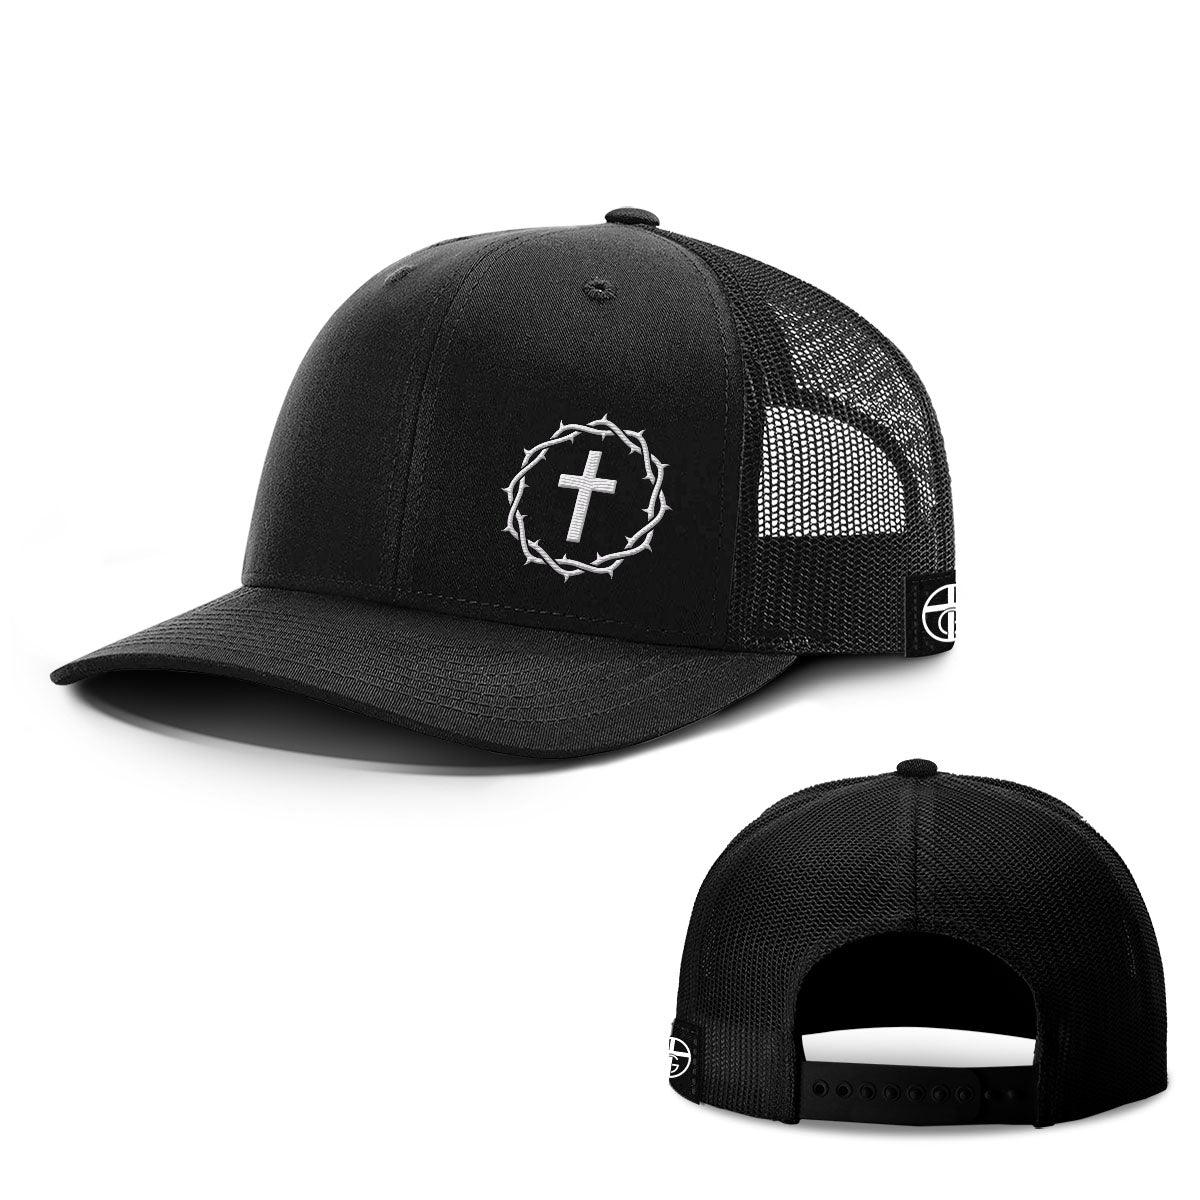 Crown of Thorns Cross Lower Left Hats - Our True God